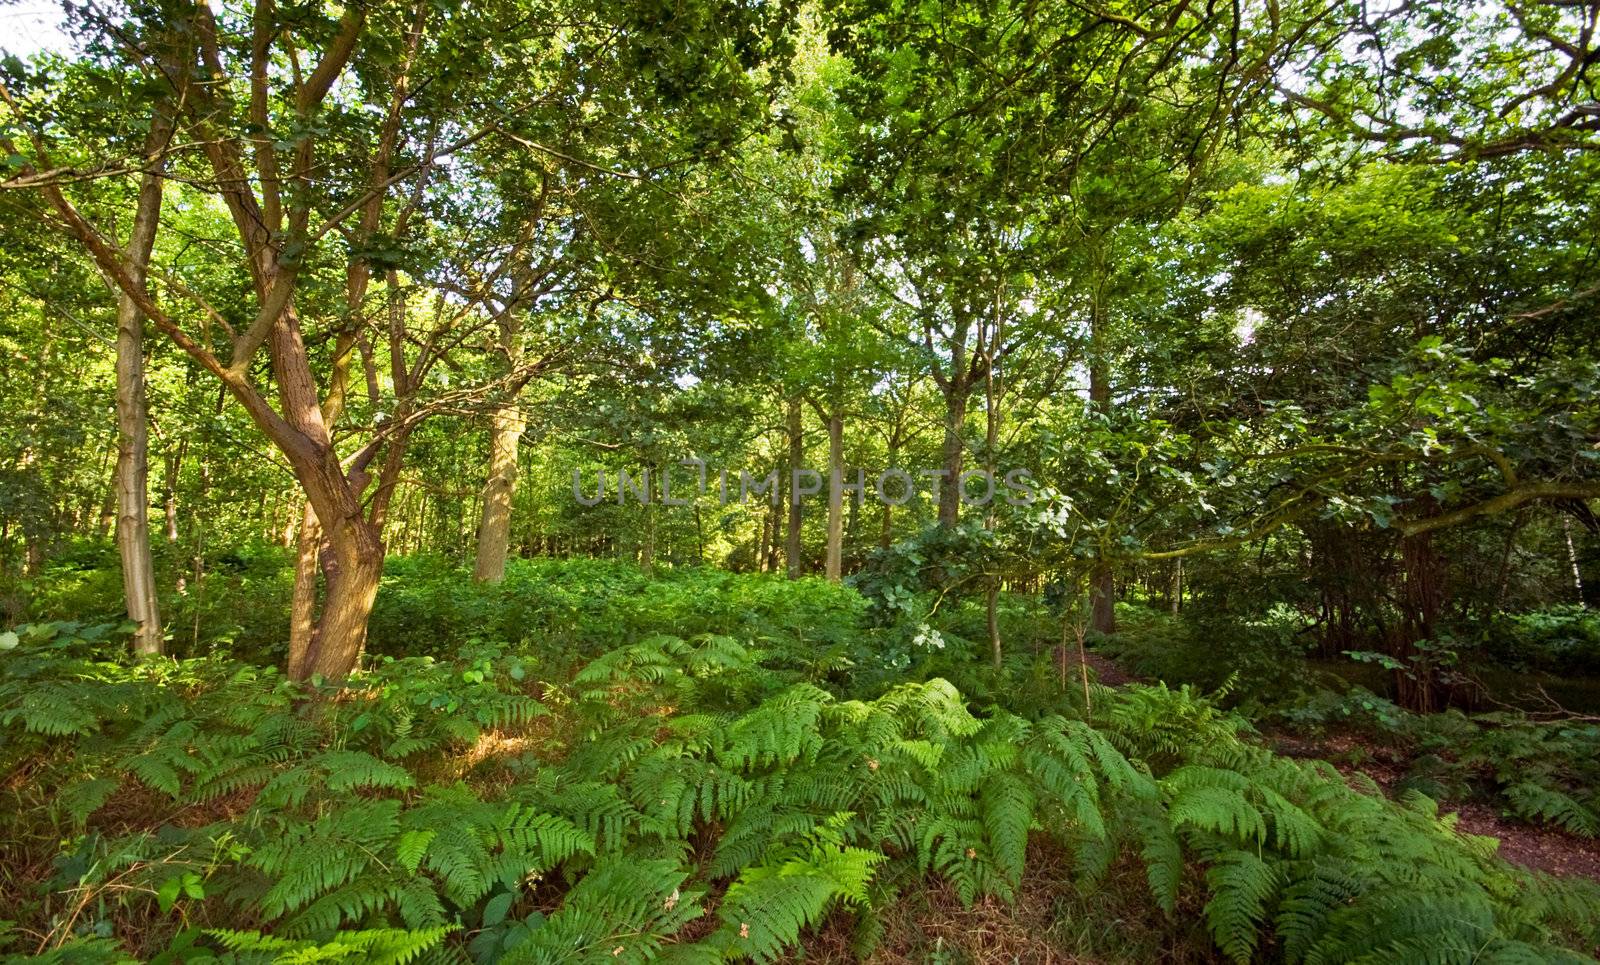 nice bright fresh green forest covered with ferns undergrowth
